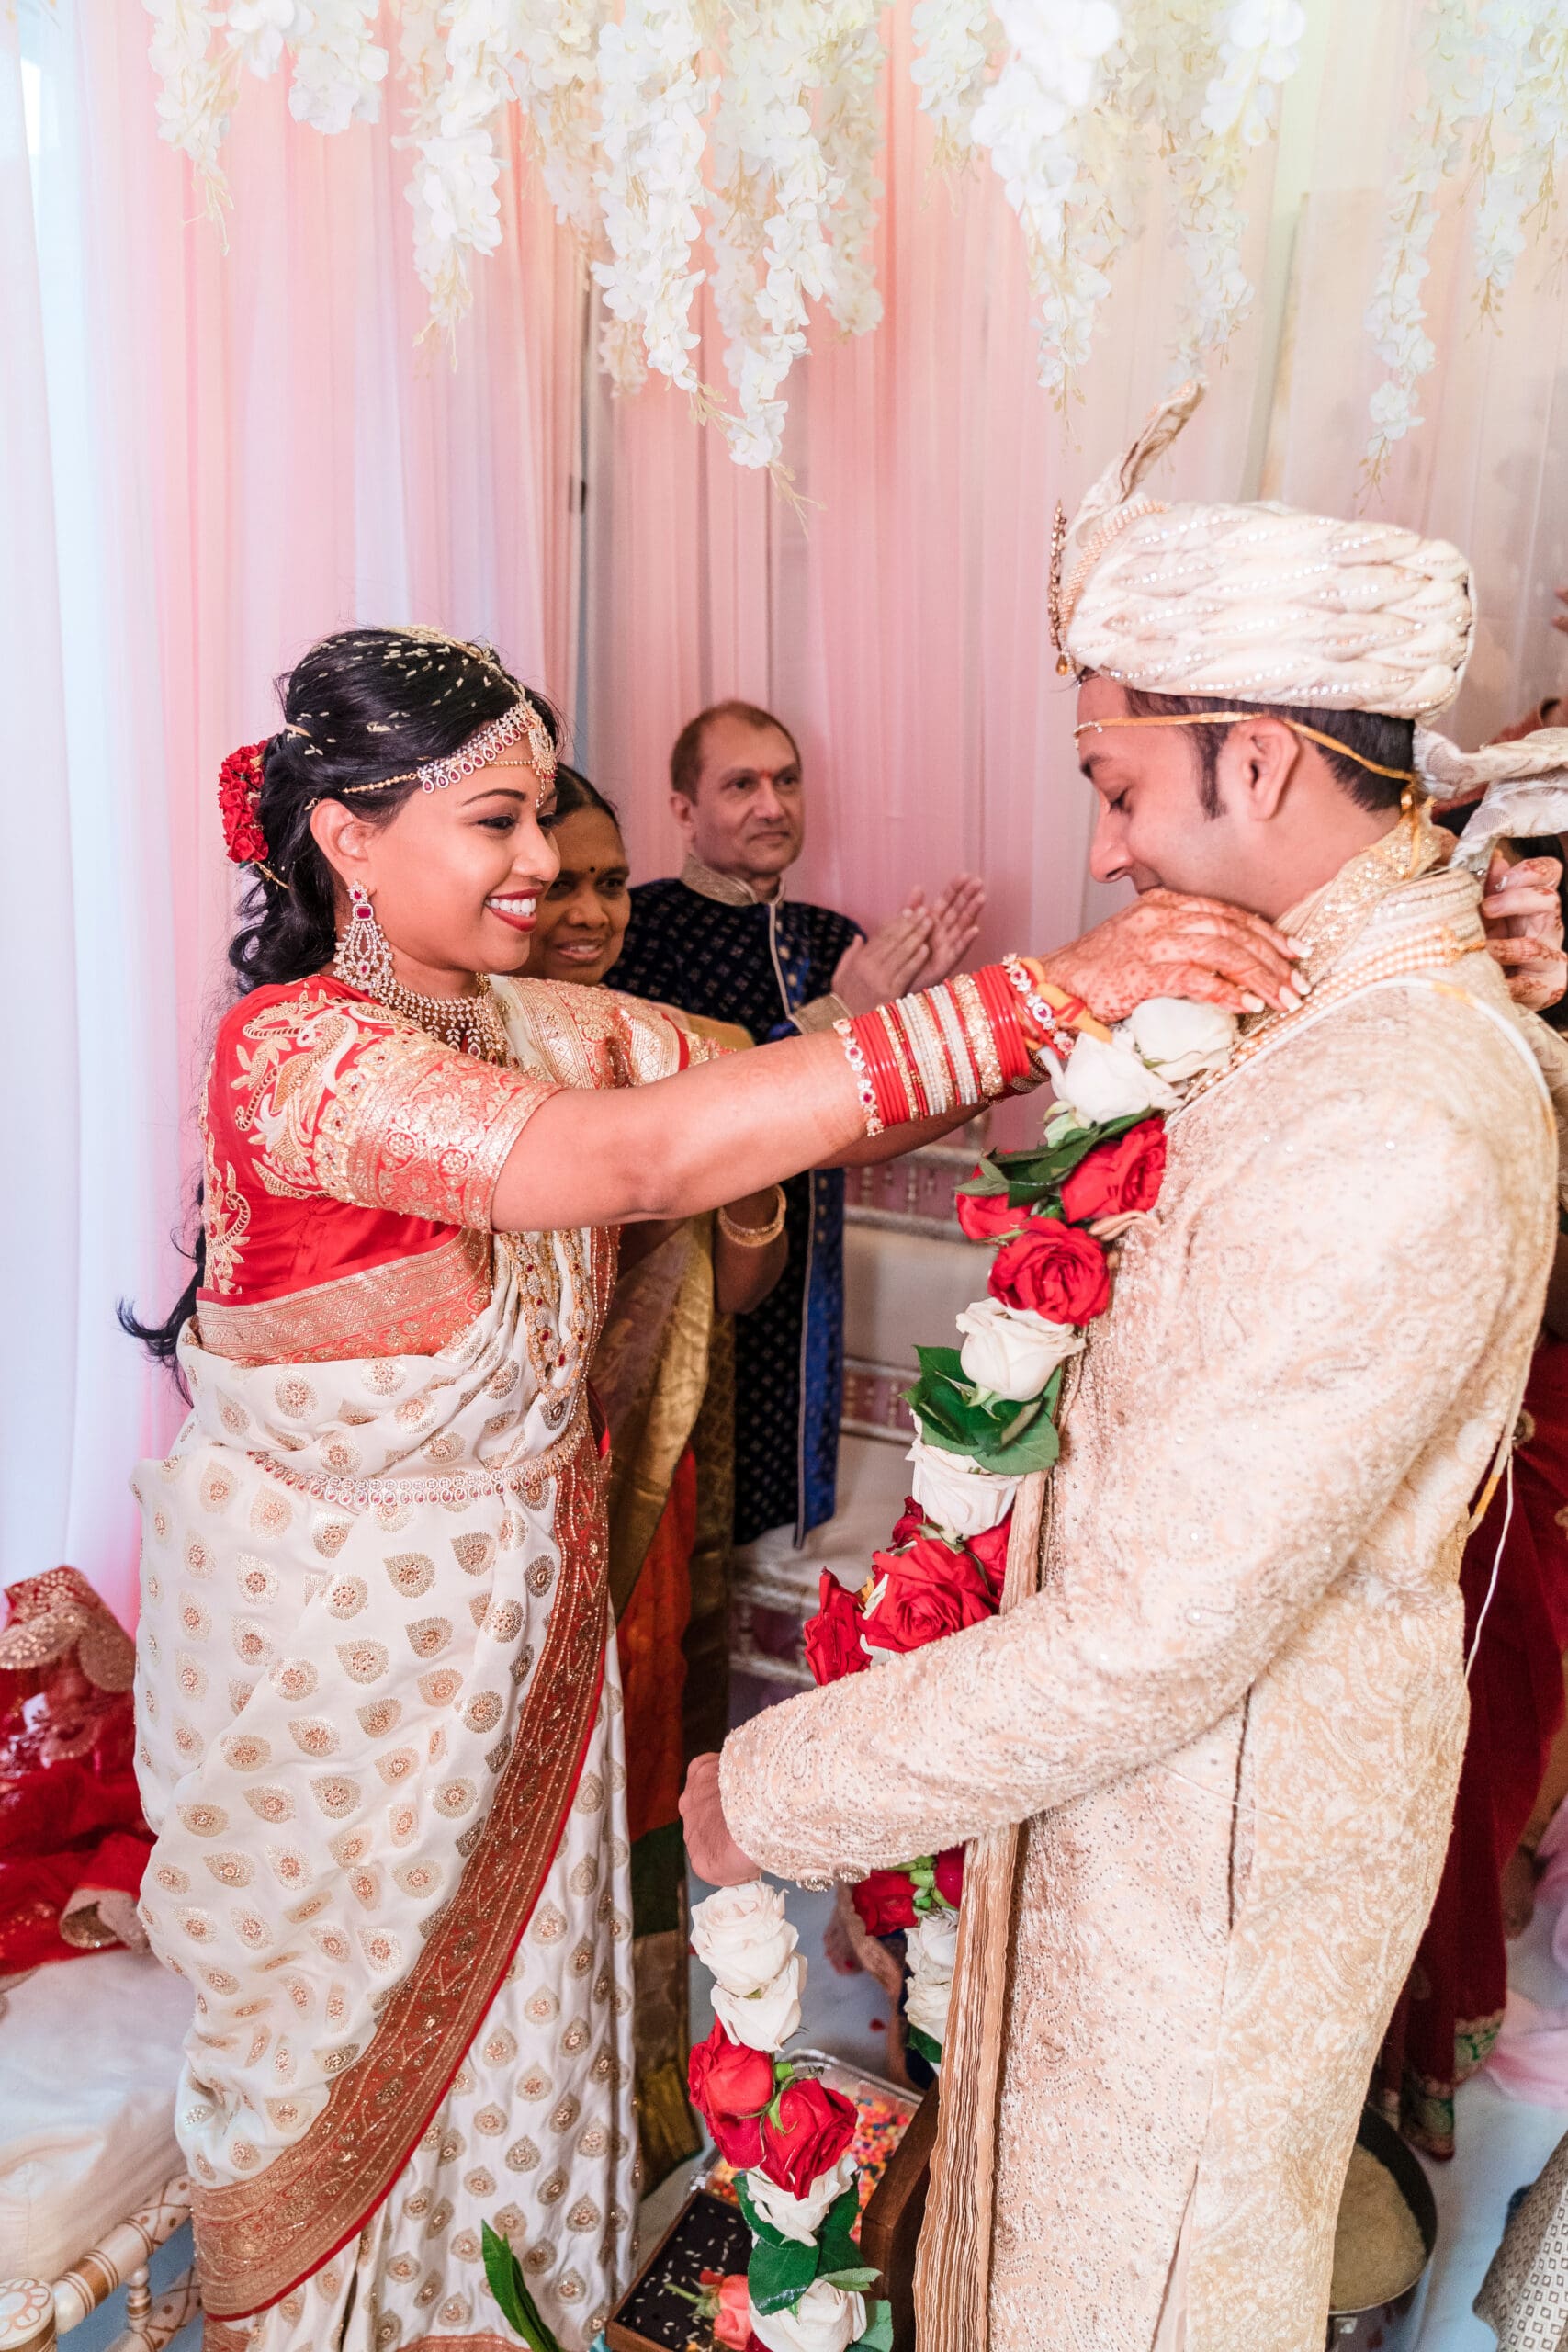 A traditional Indian couple, the bride adjusting her husband's collar, both dressed in exquisite traditional attire.